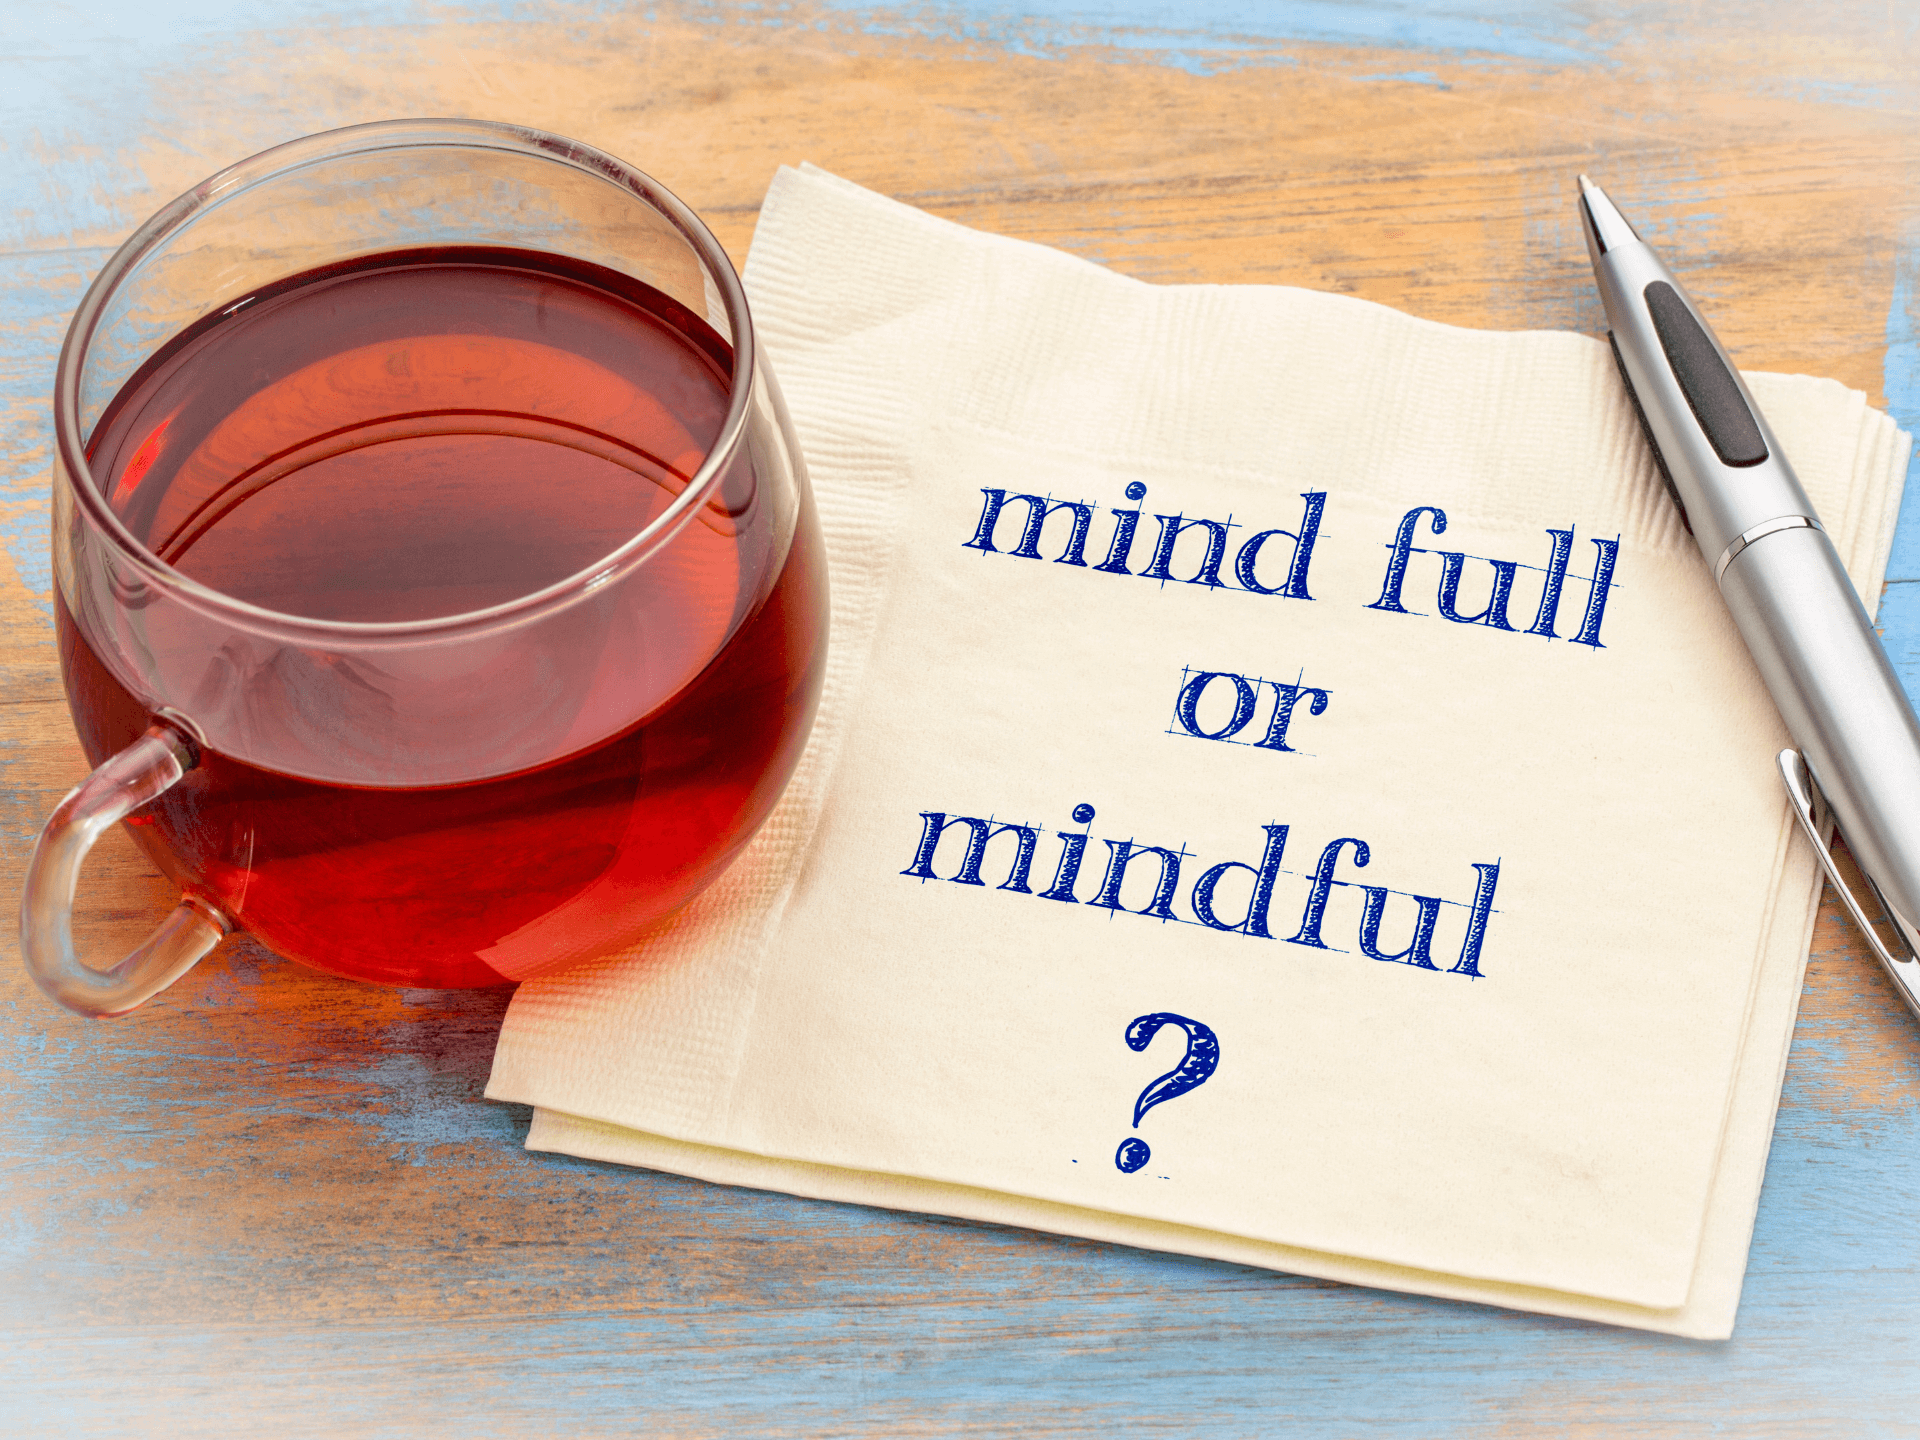 a cup of tea with a napkin next to it. the napkin has a message on it: mind full or mindful?